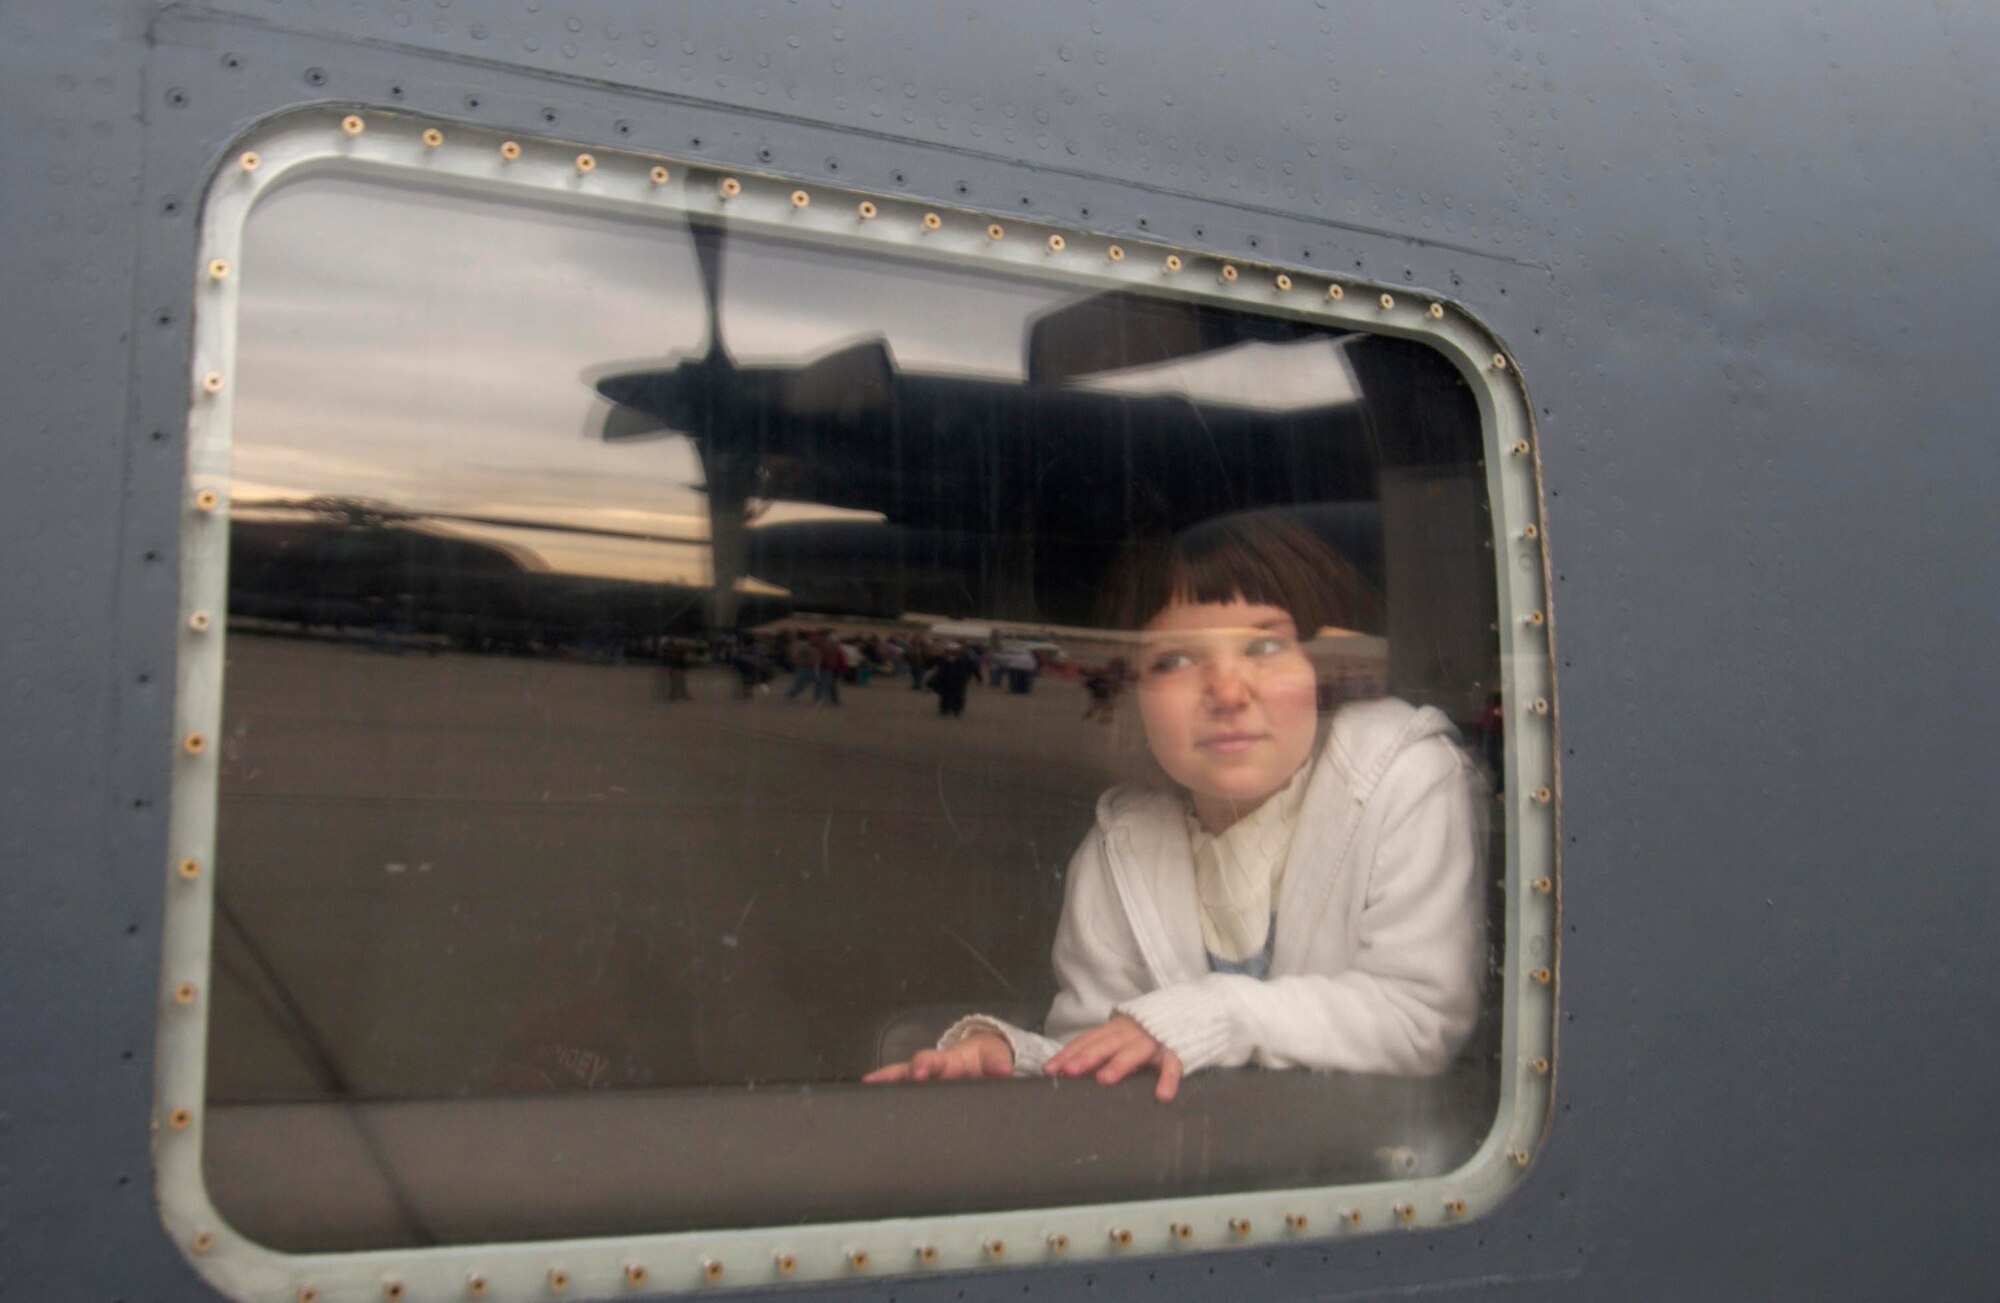 Cris Barba looks out the window of an MC-130E Combat Talon I during Aviation Nation 2006 Nov. 11 at Nellis Air Force Base, Nev. Aviation Nation has been called one of the most diverse, entertaining and well run air shows in America. The show was held Nov. 11 and 12. (U.S. Air Force photo/Master Sgt. Kevin J. Gruenwald)
